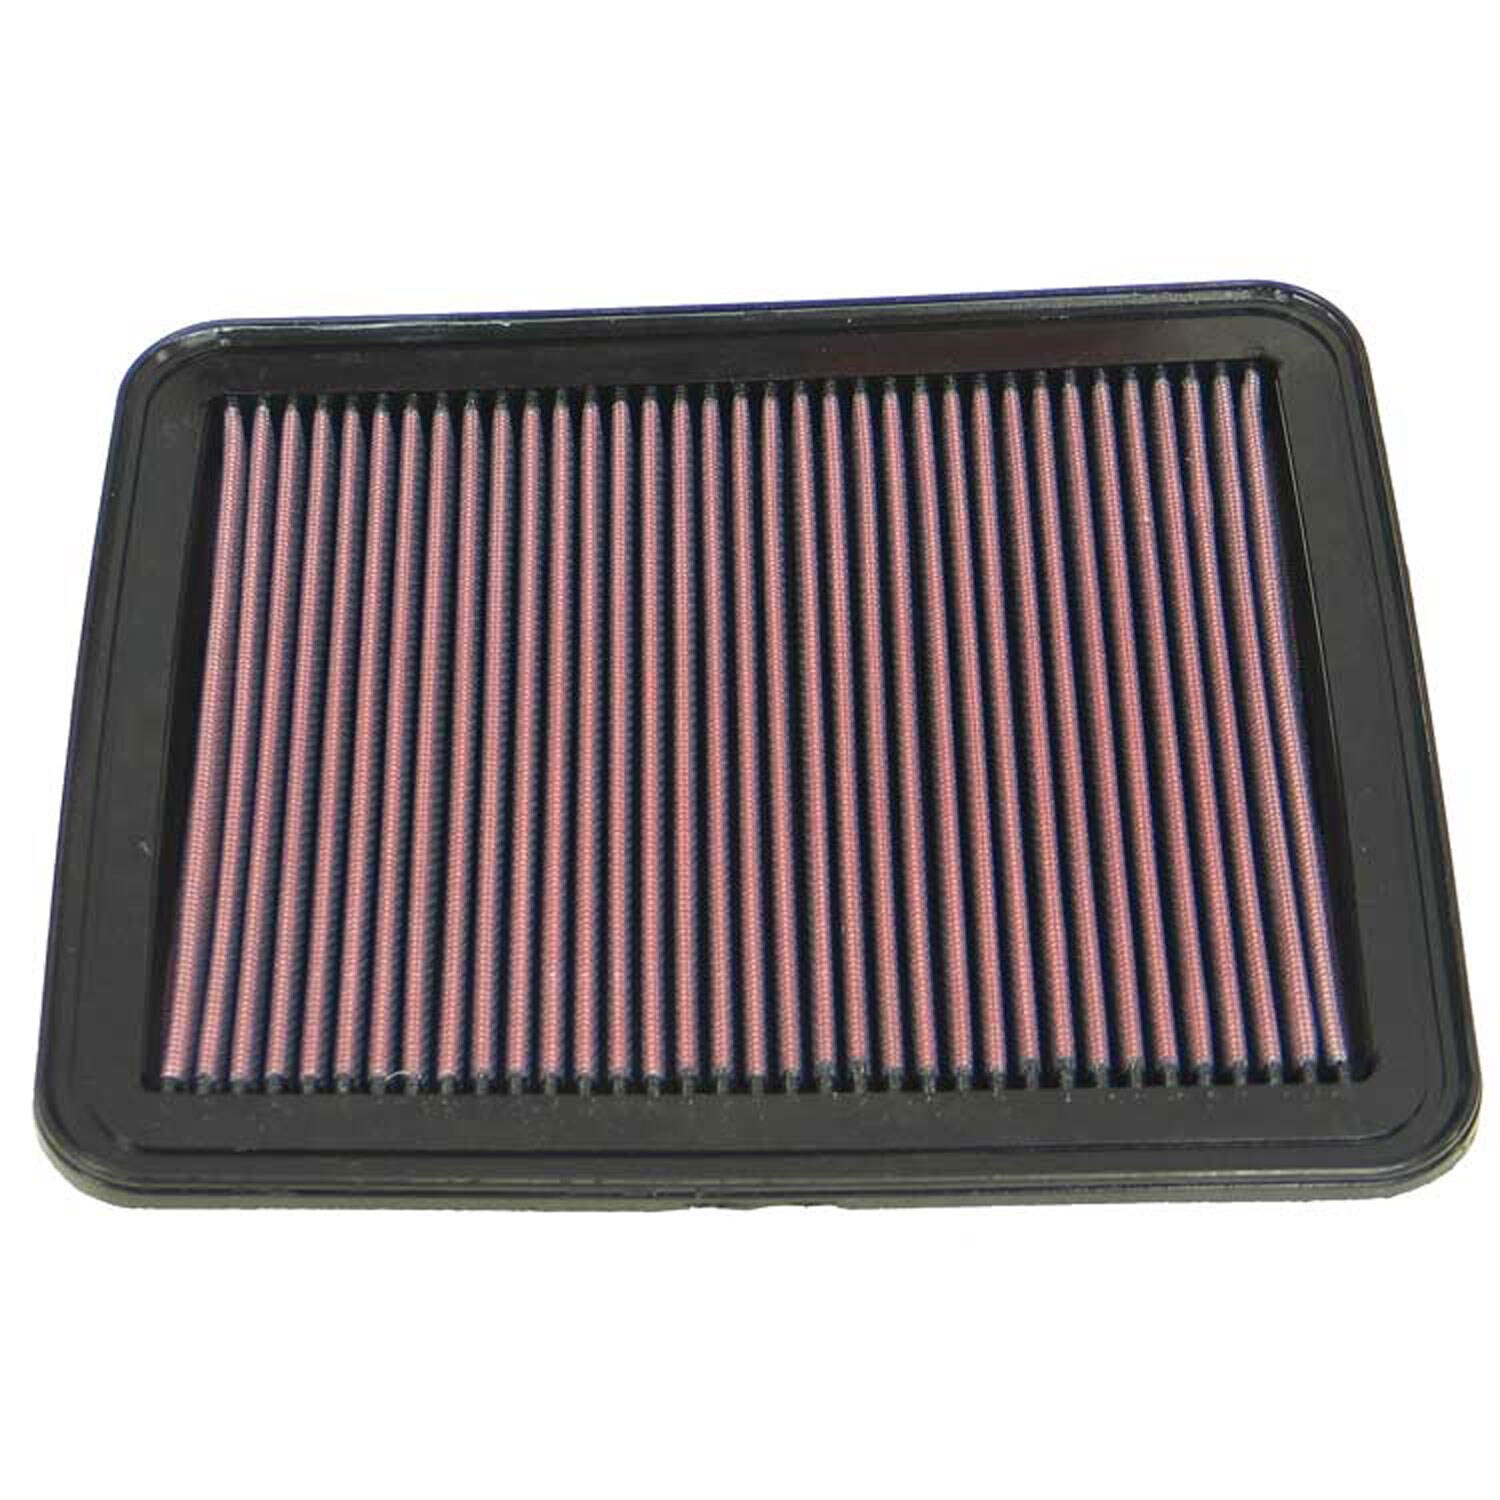 K&N K&N Engine Air Filter: High Performance, Premium, Washable, Replacement Filter: 2005-2012 Chevy/Buick/Cadillac/Pontiac (Malibu, Equinox, Lucerne, DTS, G6, Torrent), 33-2296